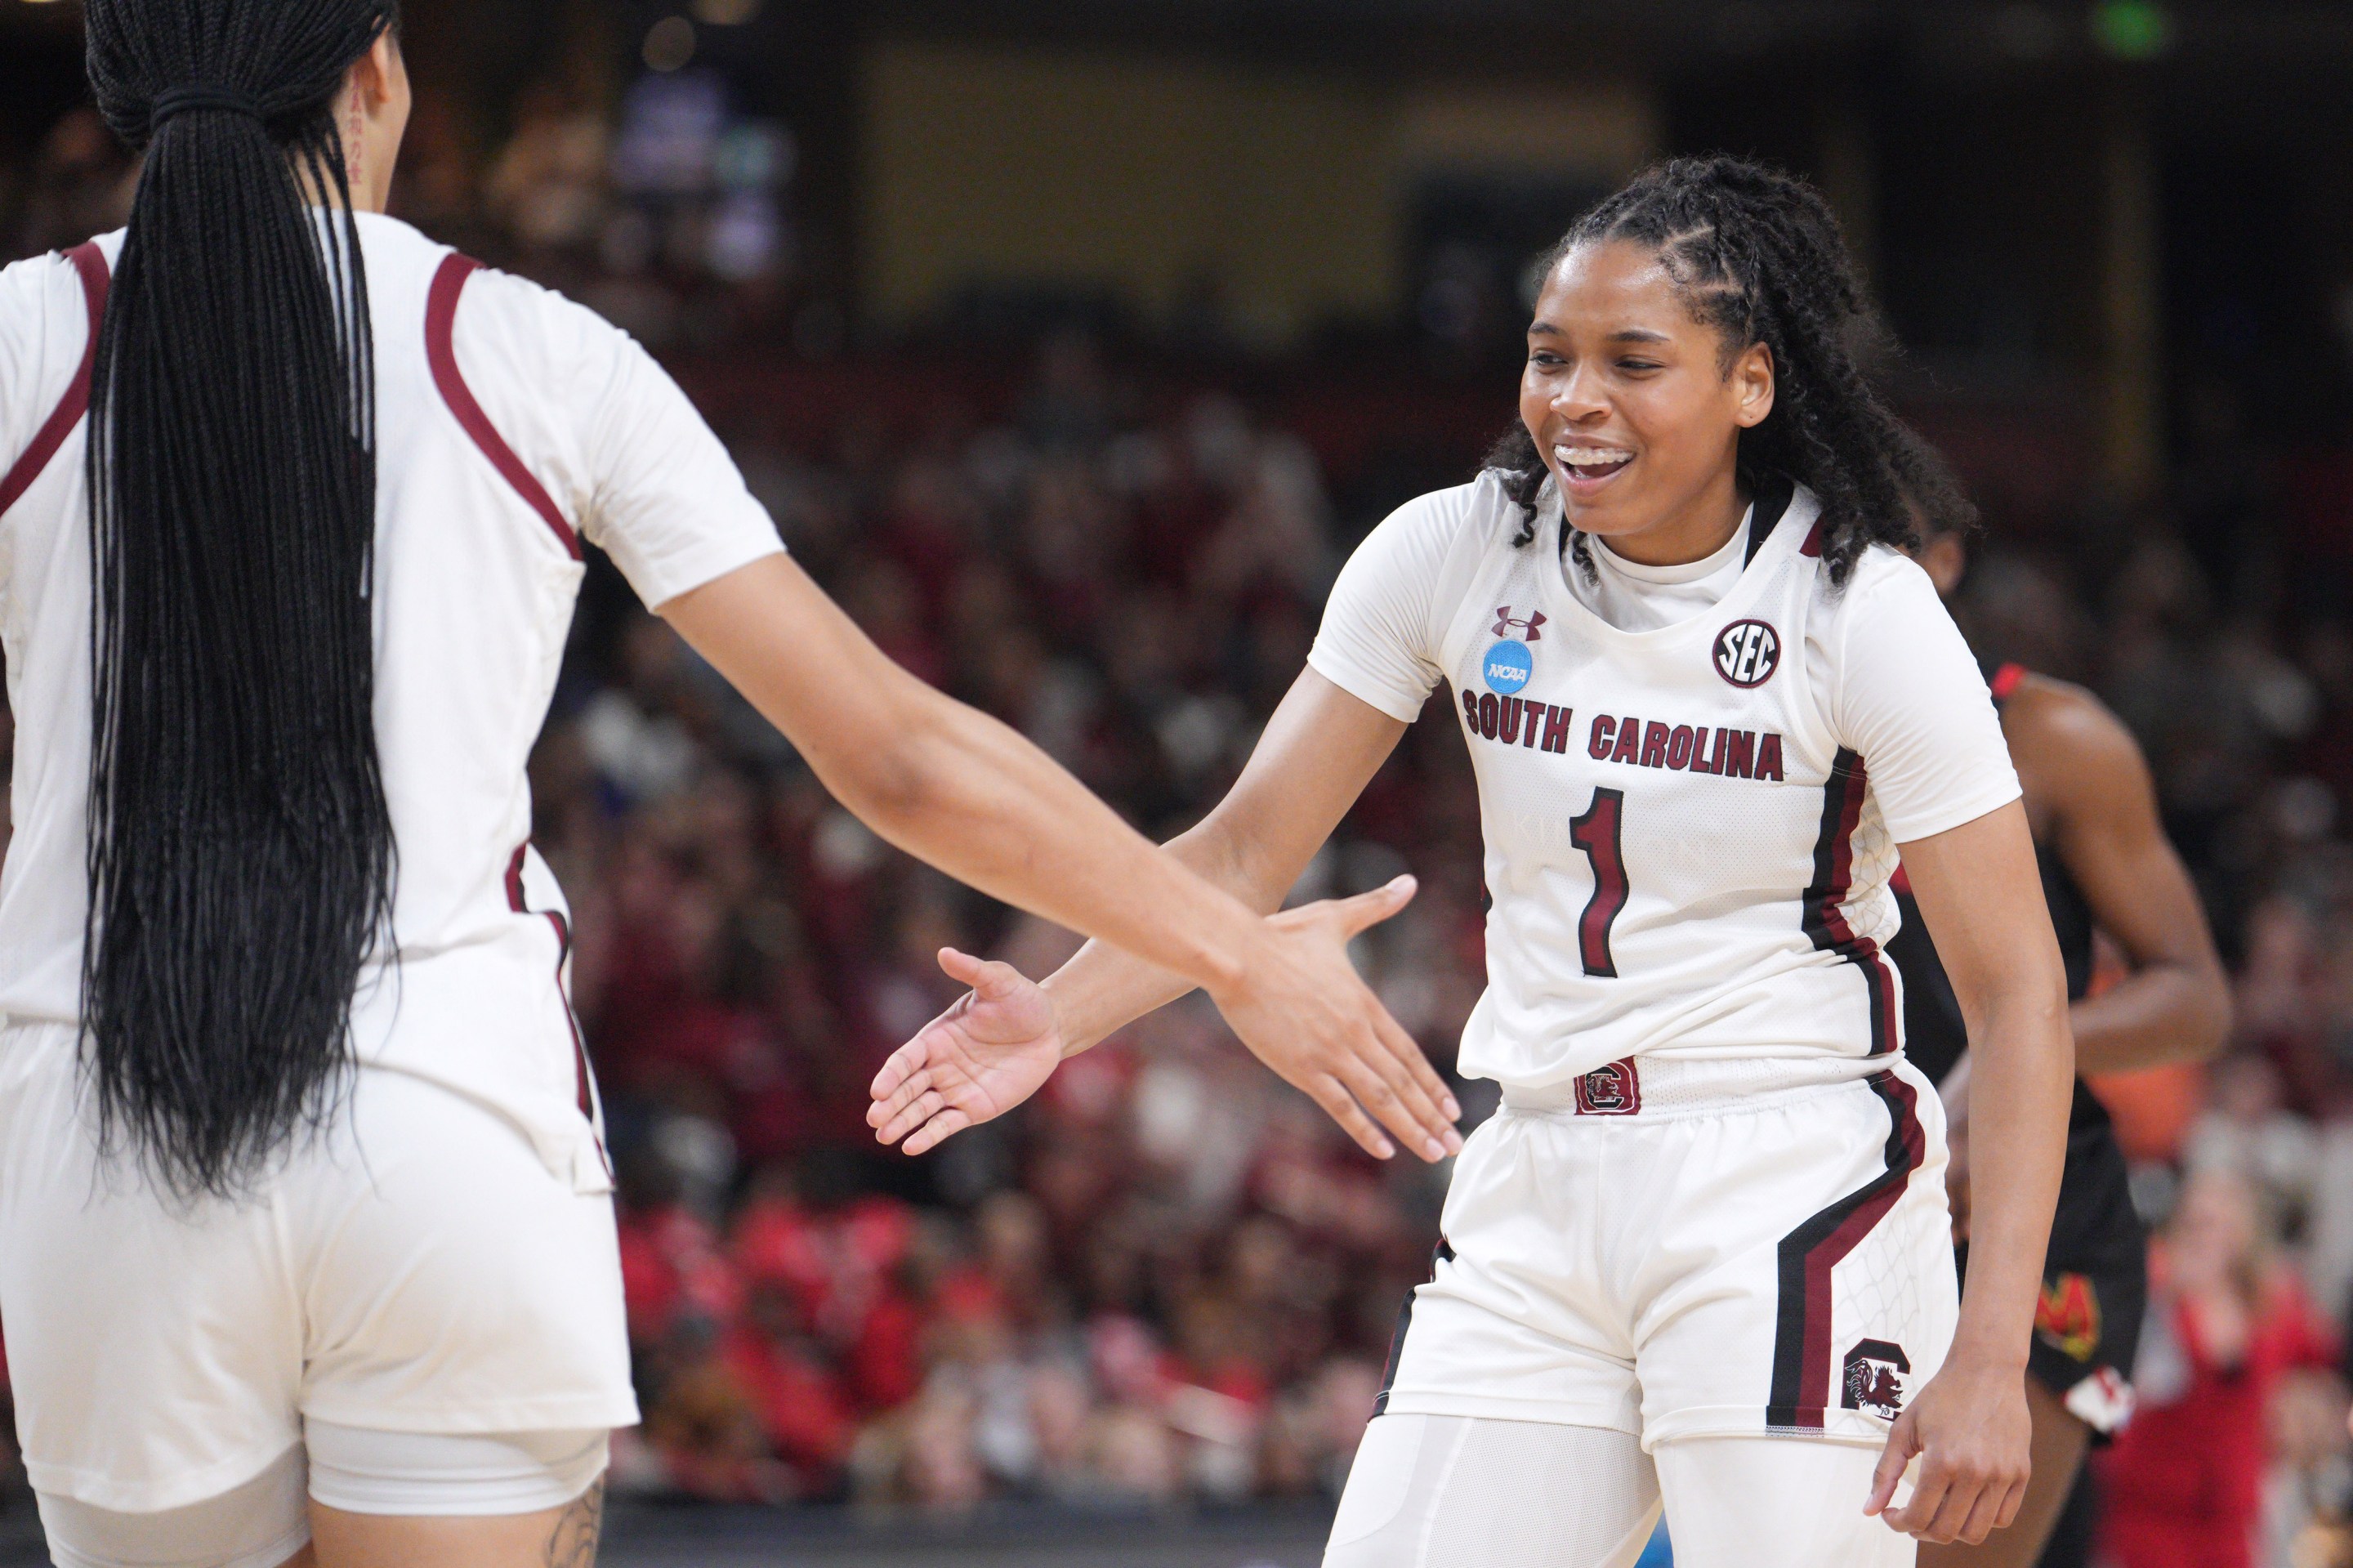 GREENVILLE, SC - MARCH 27: Zia Cooke #1 and Brea Beal #12 of the South Carolina Gamecocks celebrate in the closing minutes of their victory over the Maryland Terrapins during the Elite Eight round of the 2023 NCAA Womens Basketball Tournament held at Bon Secours Wellness Arena on March 27, 2023 in Greenville, South Carolina.